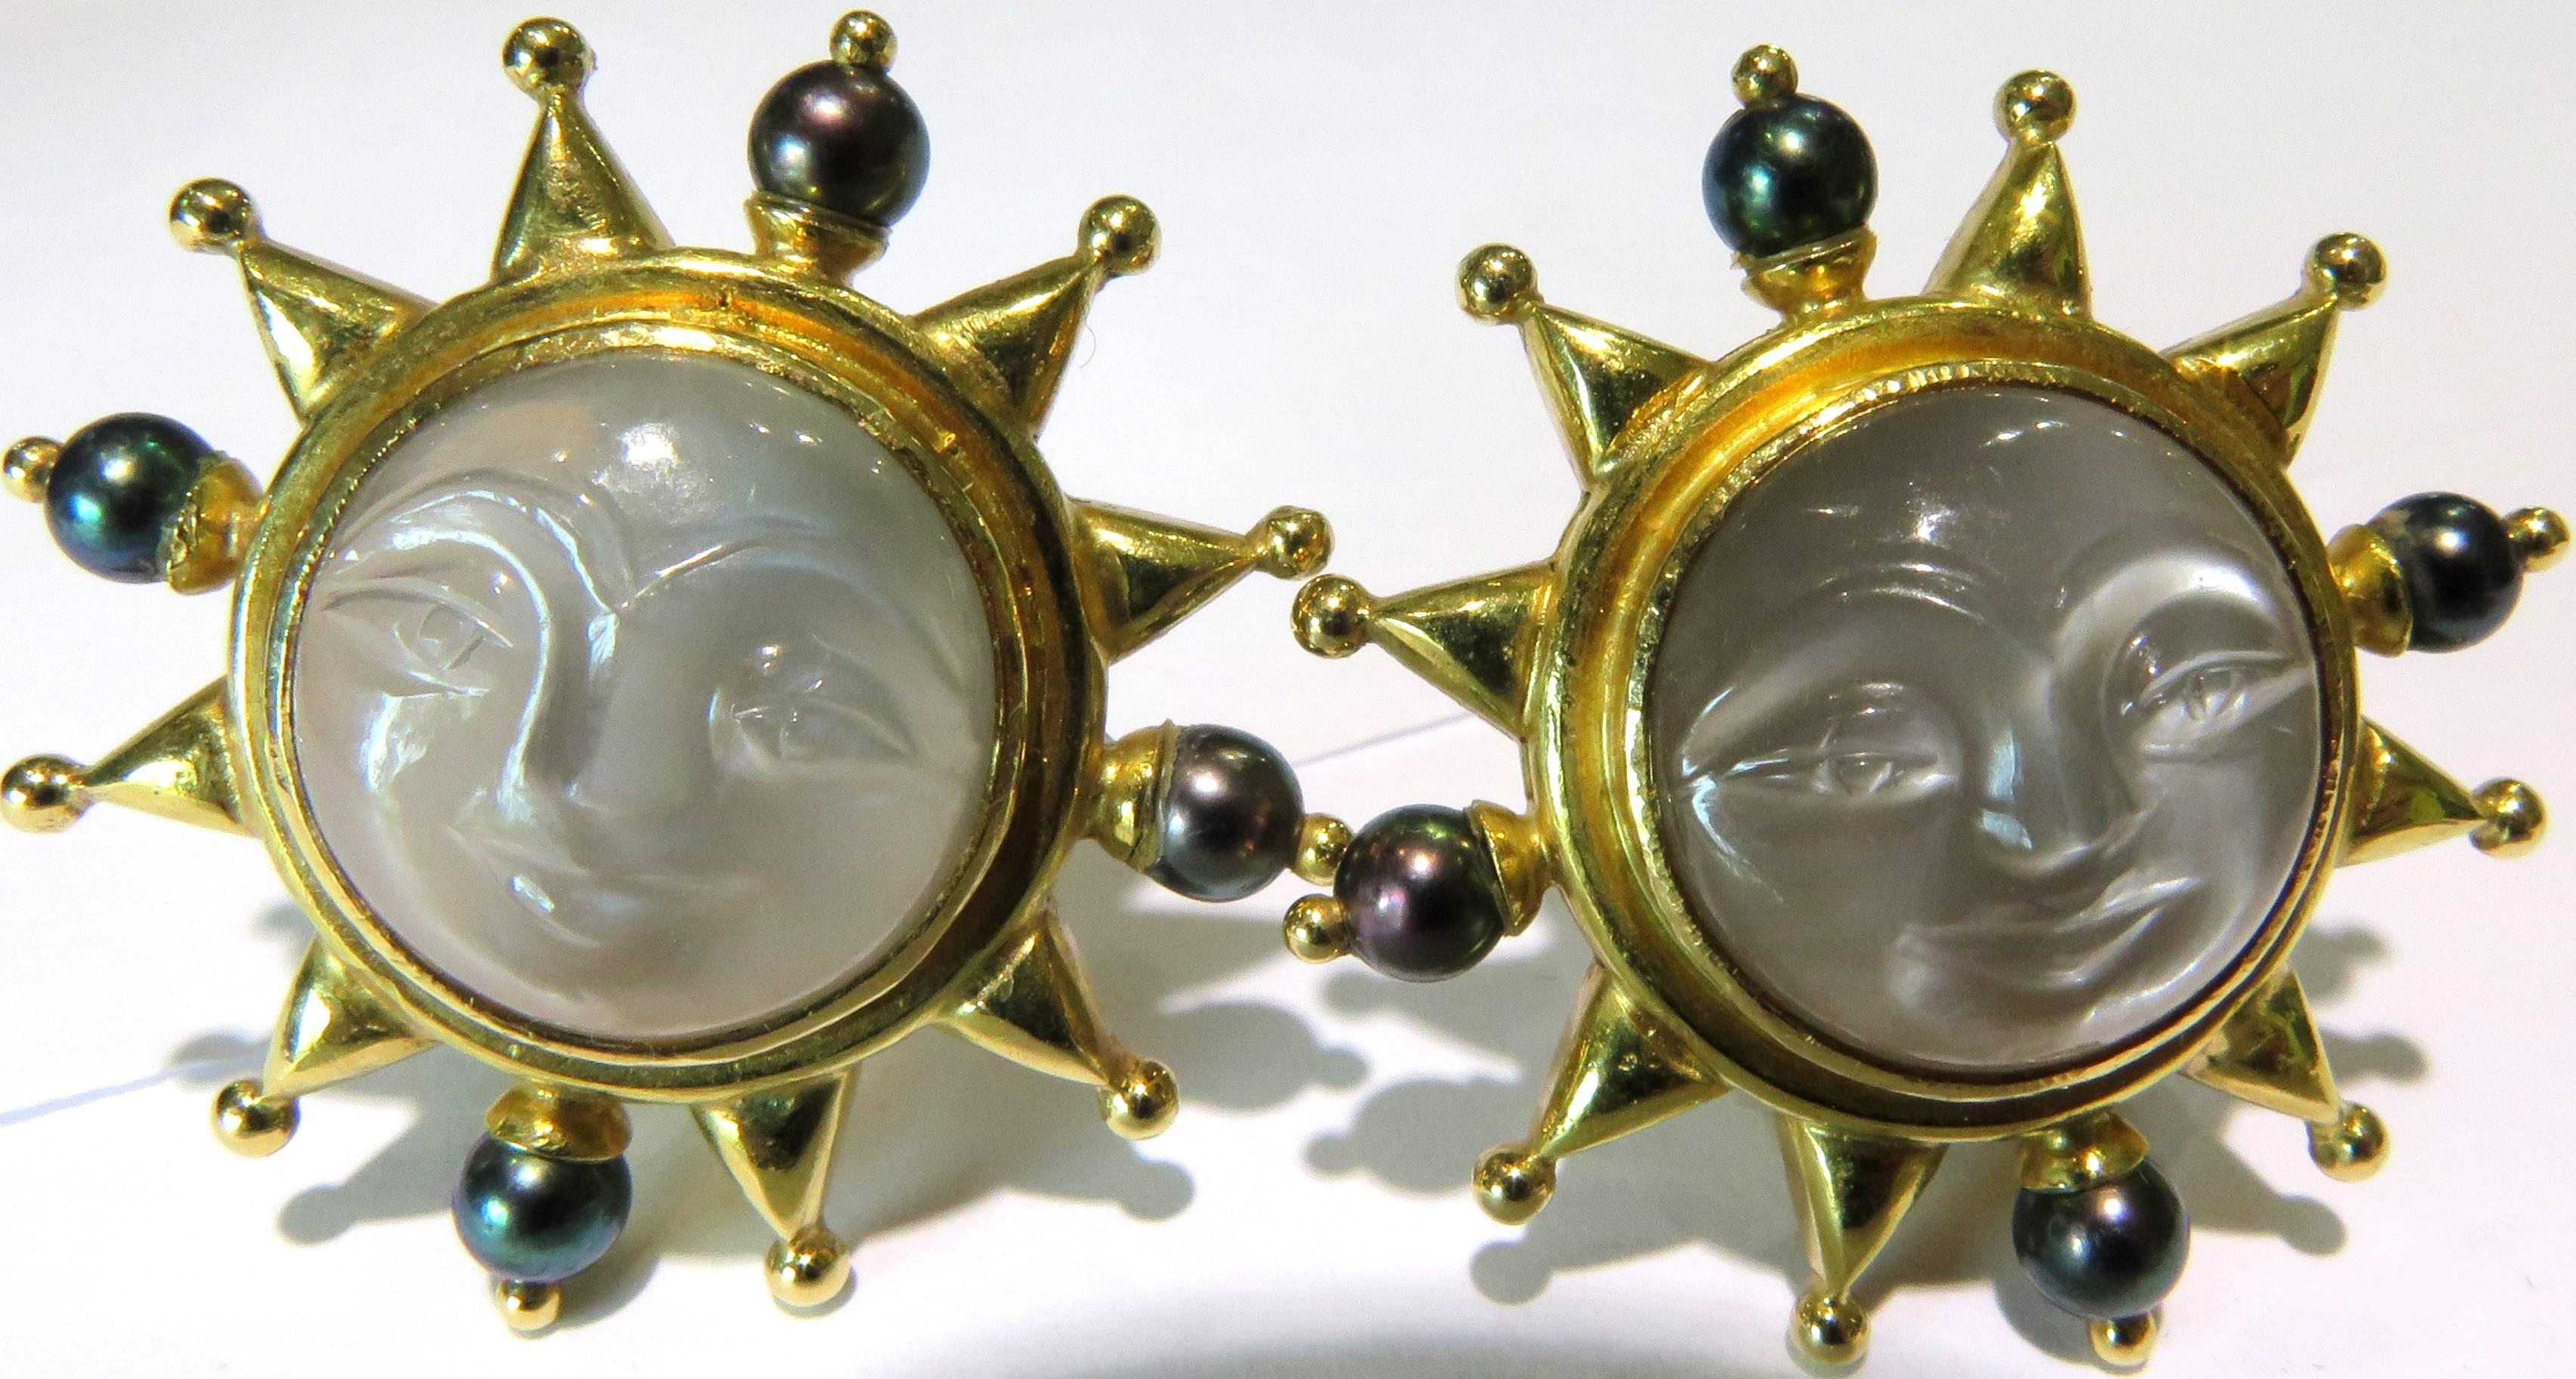 moon face jewelry